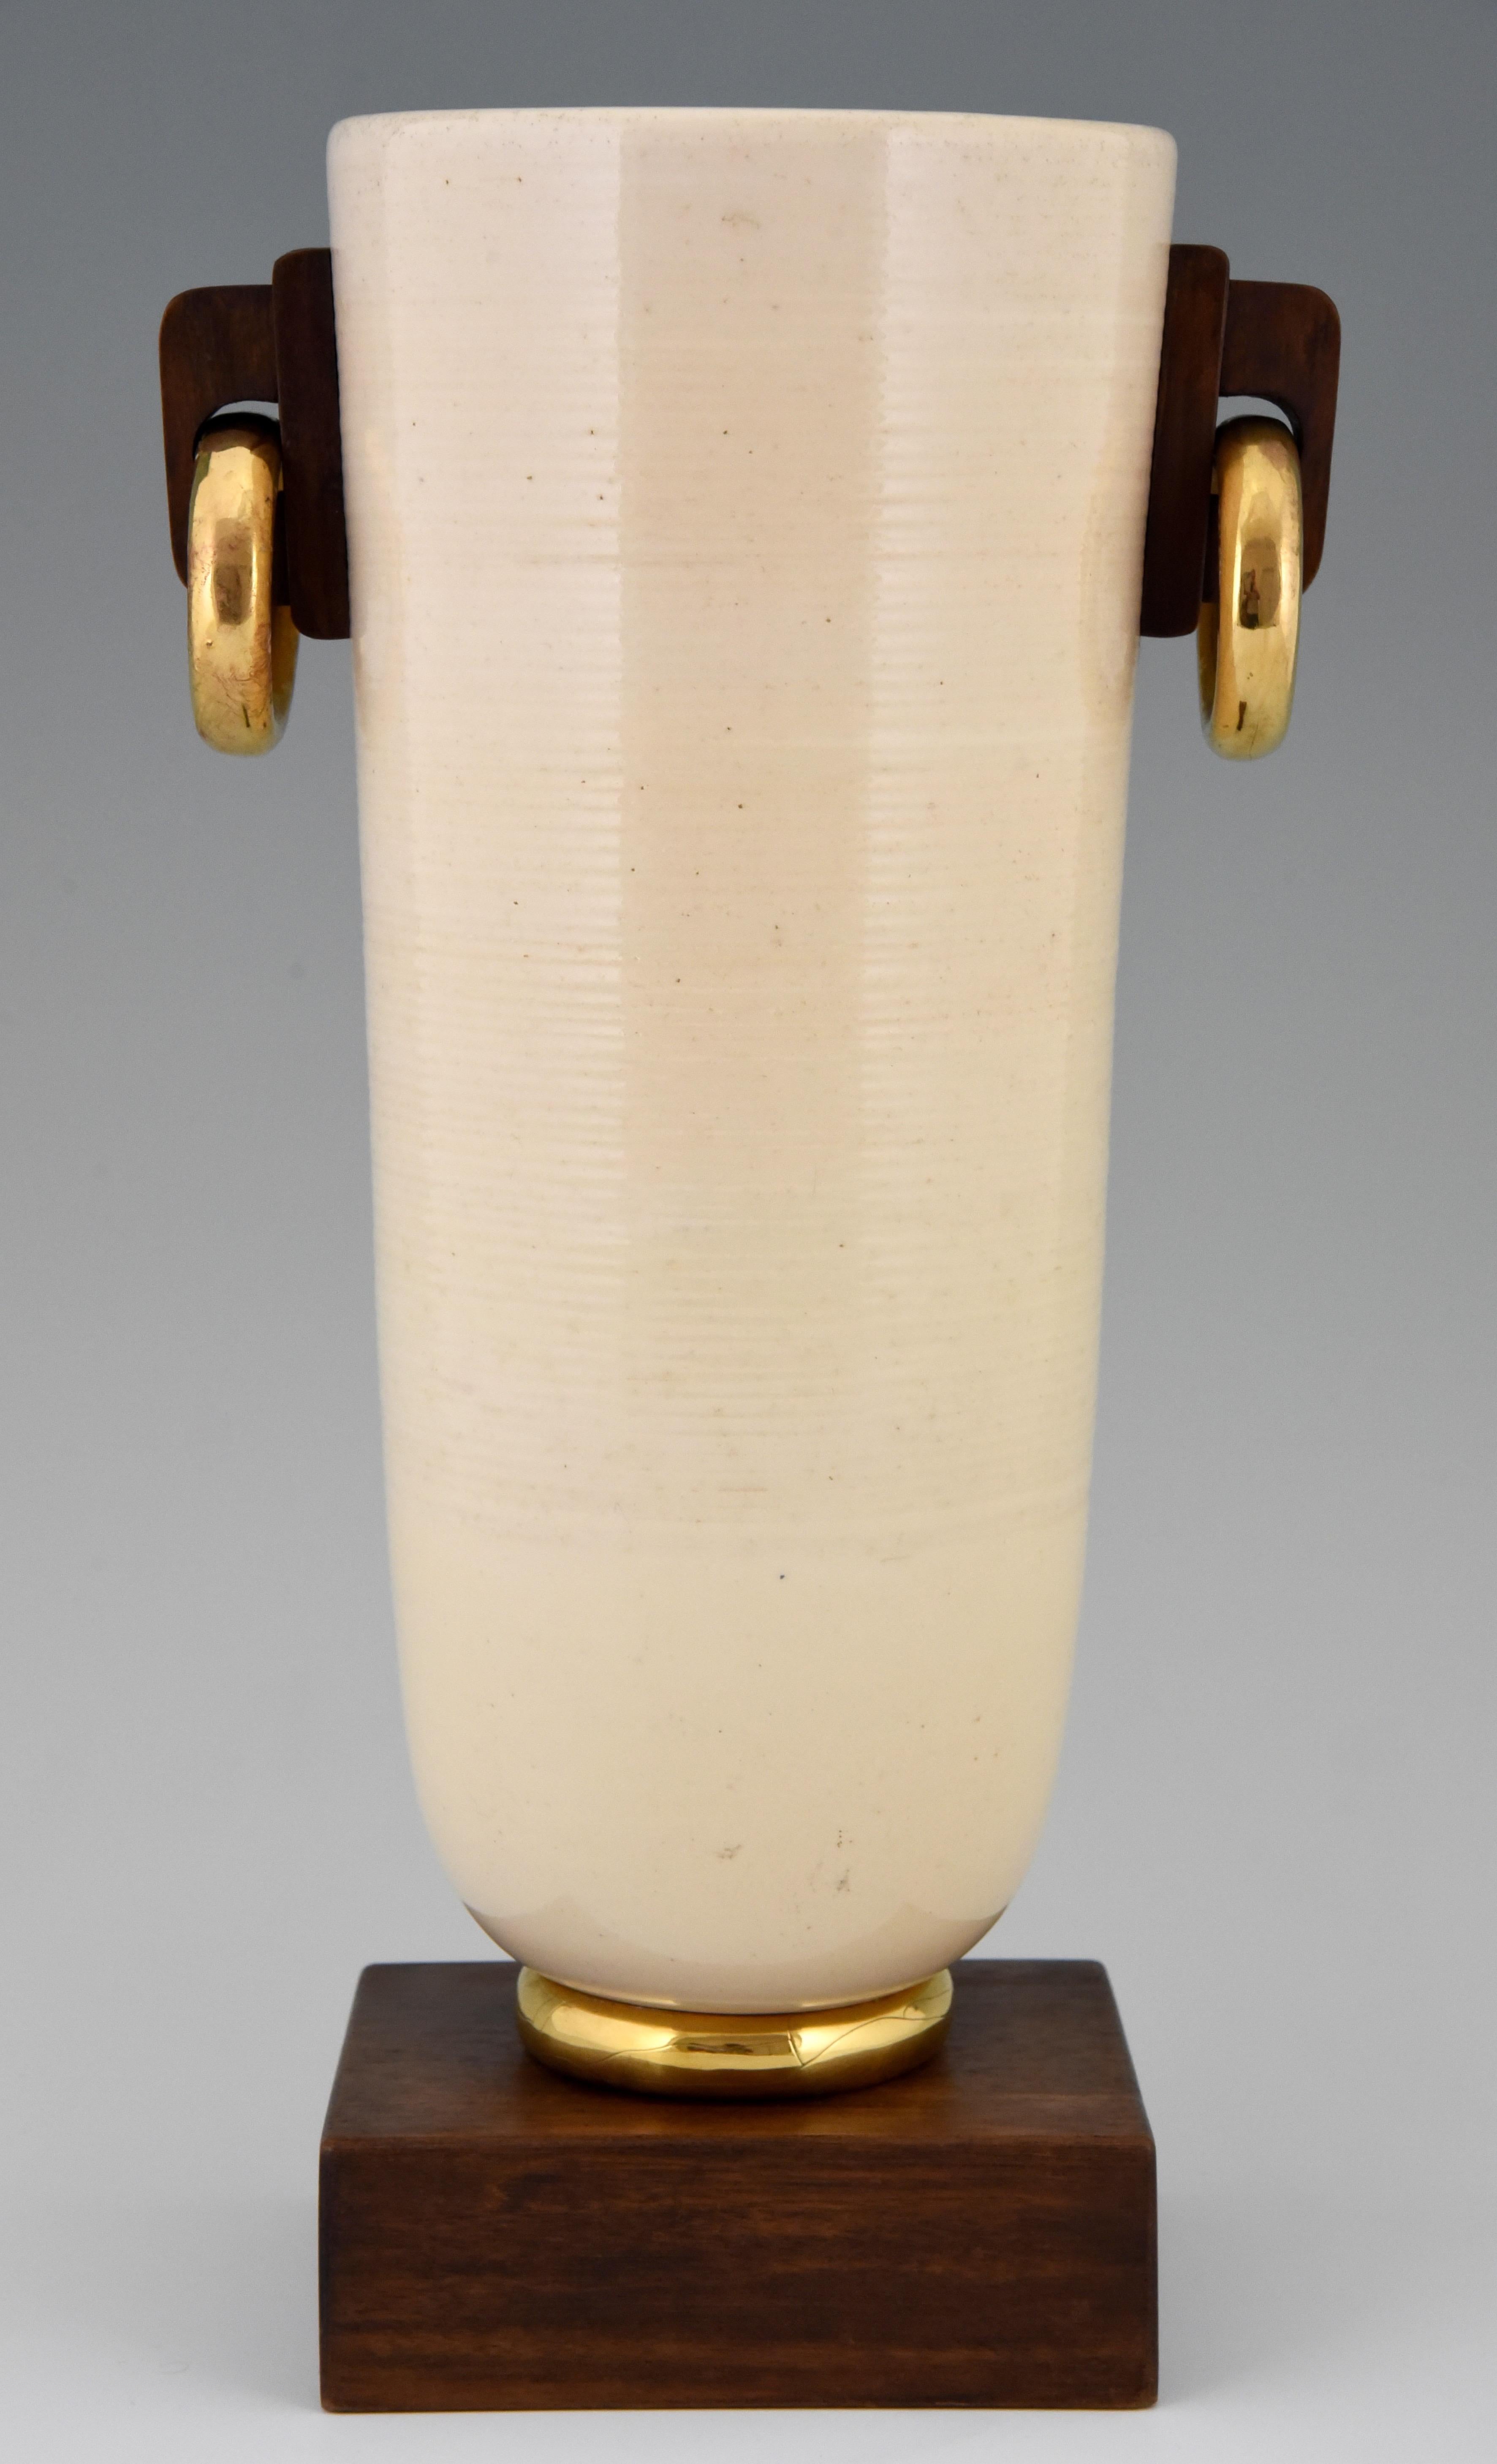 Tall Art Deco vase in cream and gold ceramic with wooden handles and base. In the style of Luc Lanel. 
The same vase has been auctioned at Millon Auctioneers. 

Similar vases are illustrated in:
Lanel, Luc & Marjolaine. ?Dominique Forrest.